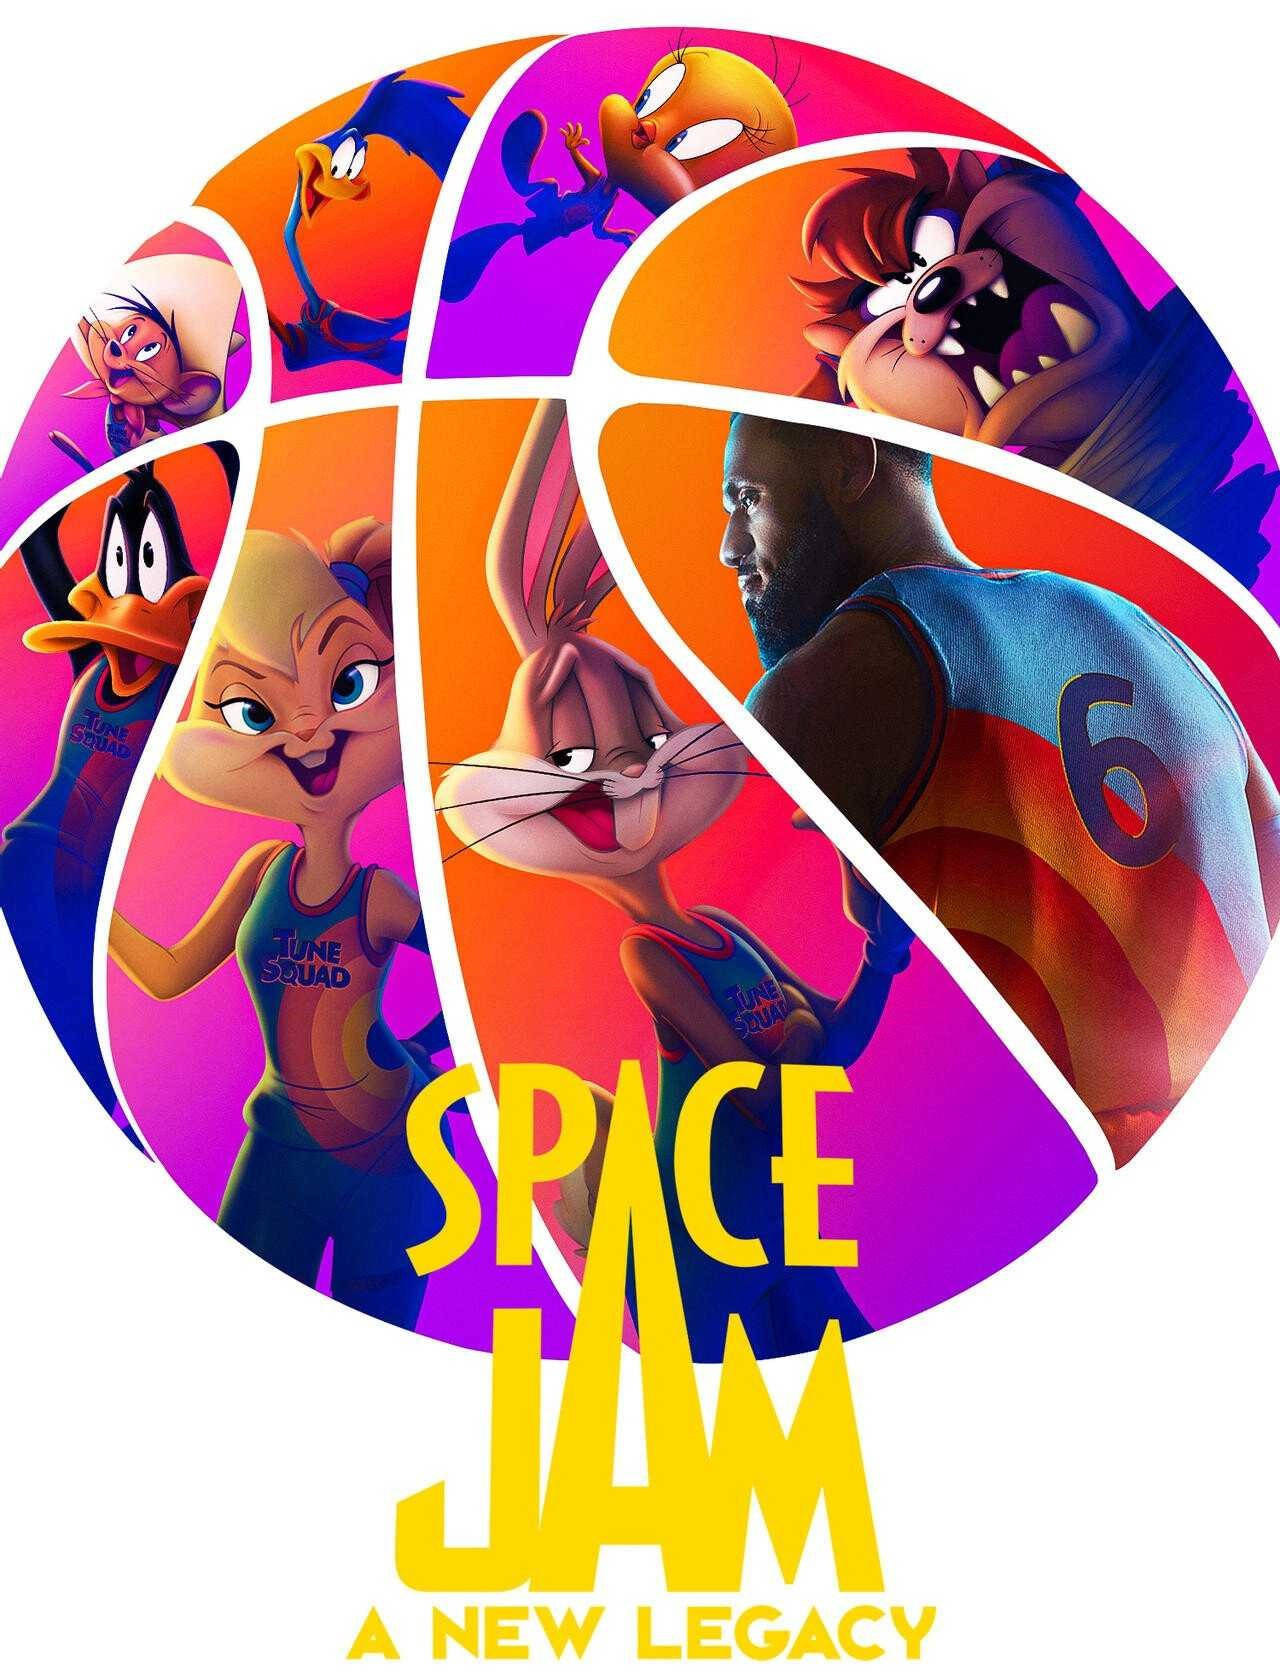 "Don't miss the return of famous basketball star, Michael Jordan, and his Tune Squad teammates in Space Jam 2!" Wallpaper